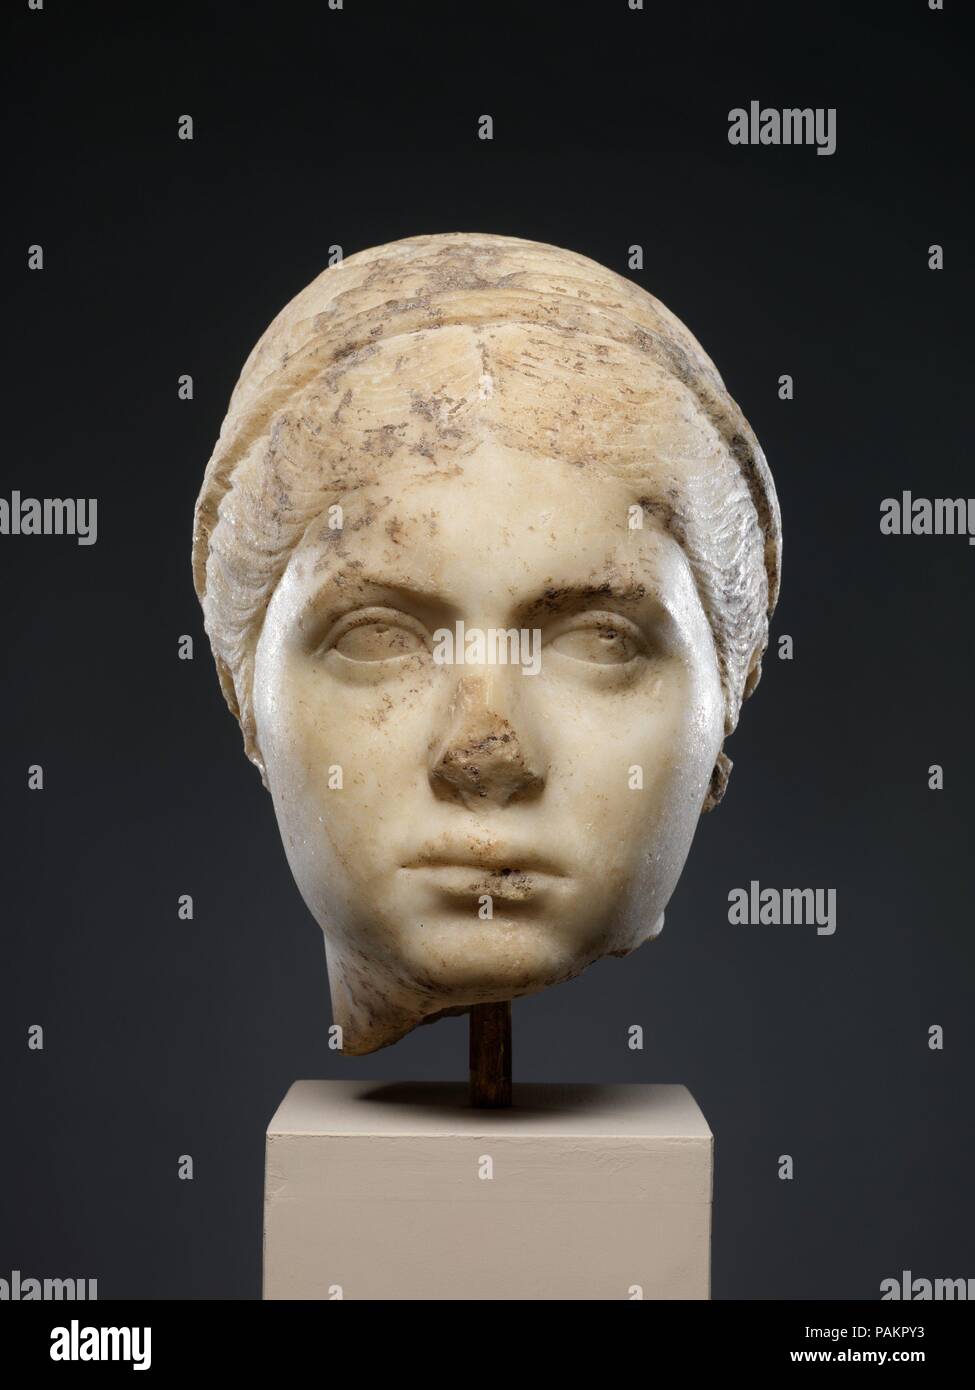 Marble portrait of a young woman. Culture: Roman. Dimensions: H. 10 1/8 in. (25.7 cm). Date: ca. A.D. 139-150.  This girl's hair in a braided coil toward the back of the head imitates the style worn by Faustina the Younger, wife of the emperor Marcus Aurelius (r. A.D. 161-180), as she is depicted on coins as late as A.D. 140-150. Museum: Metropolitan Museum of Art, New York, USA. Stock Photo